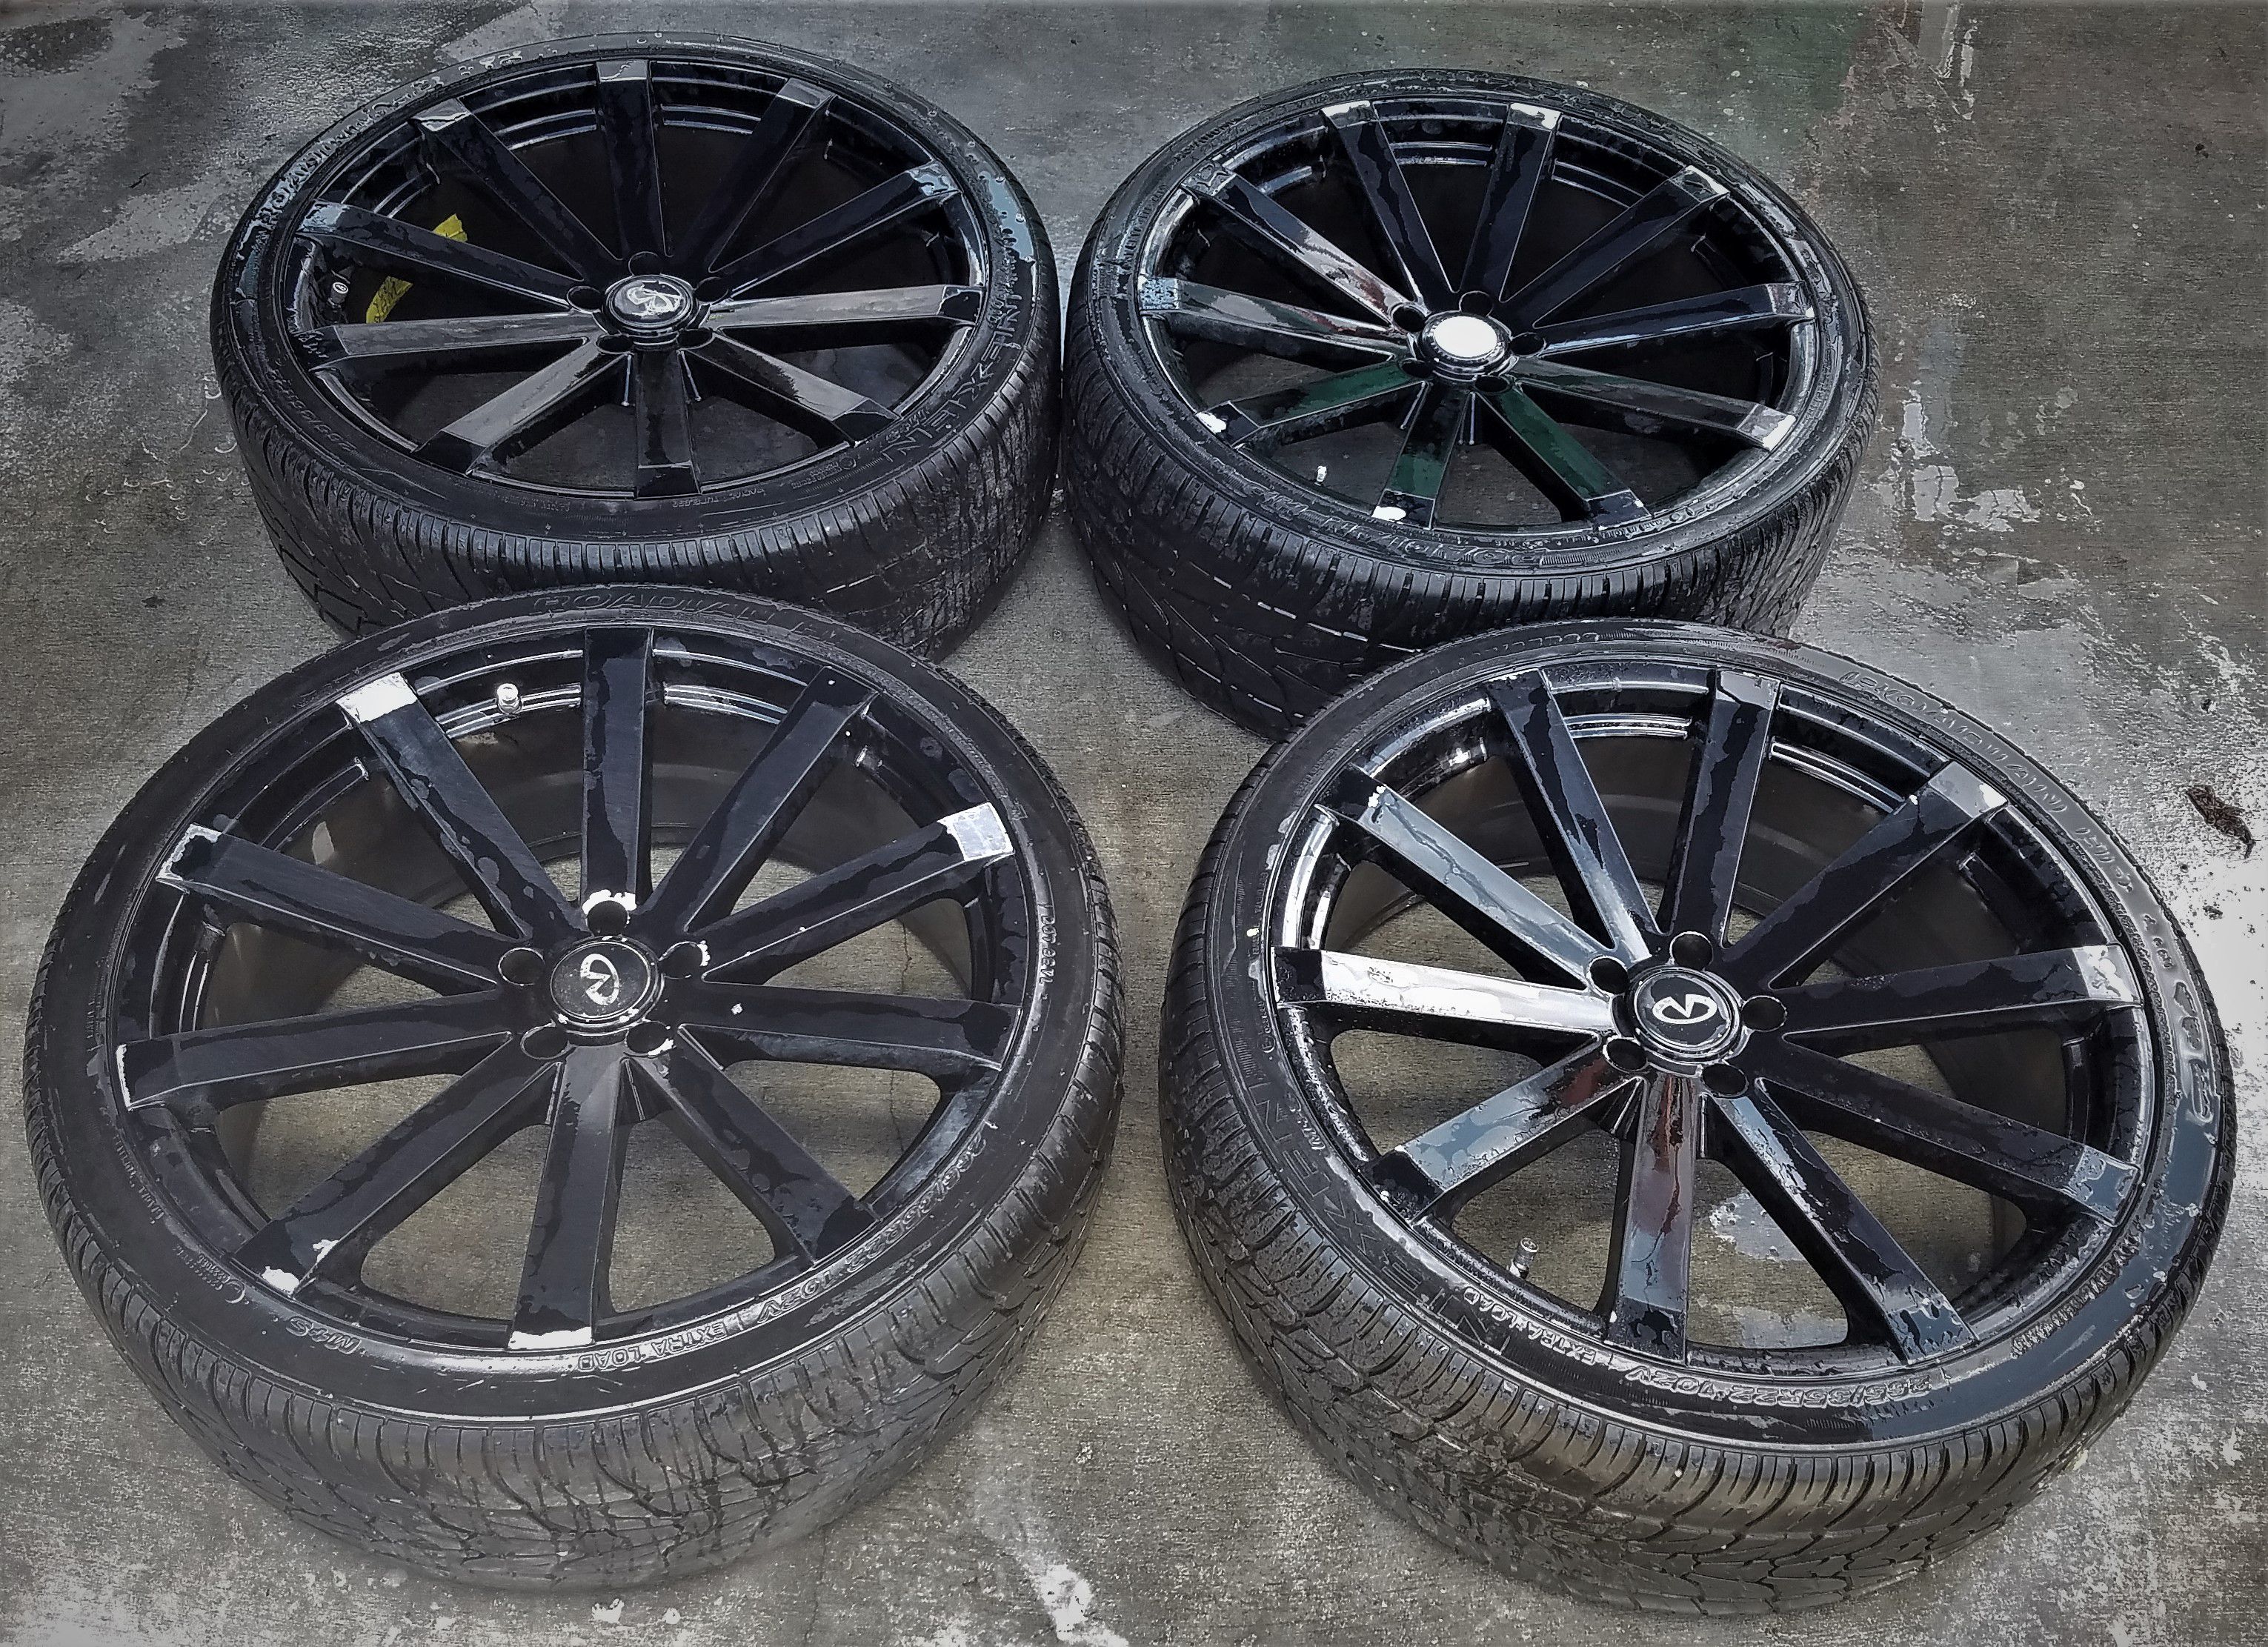 INFINITI FX35 EX35 22" INCH WHEELS RIMS WITH TIRES SUV